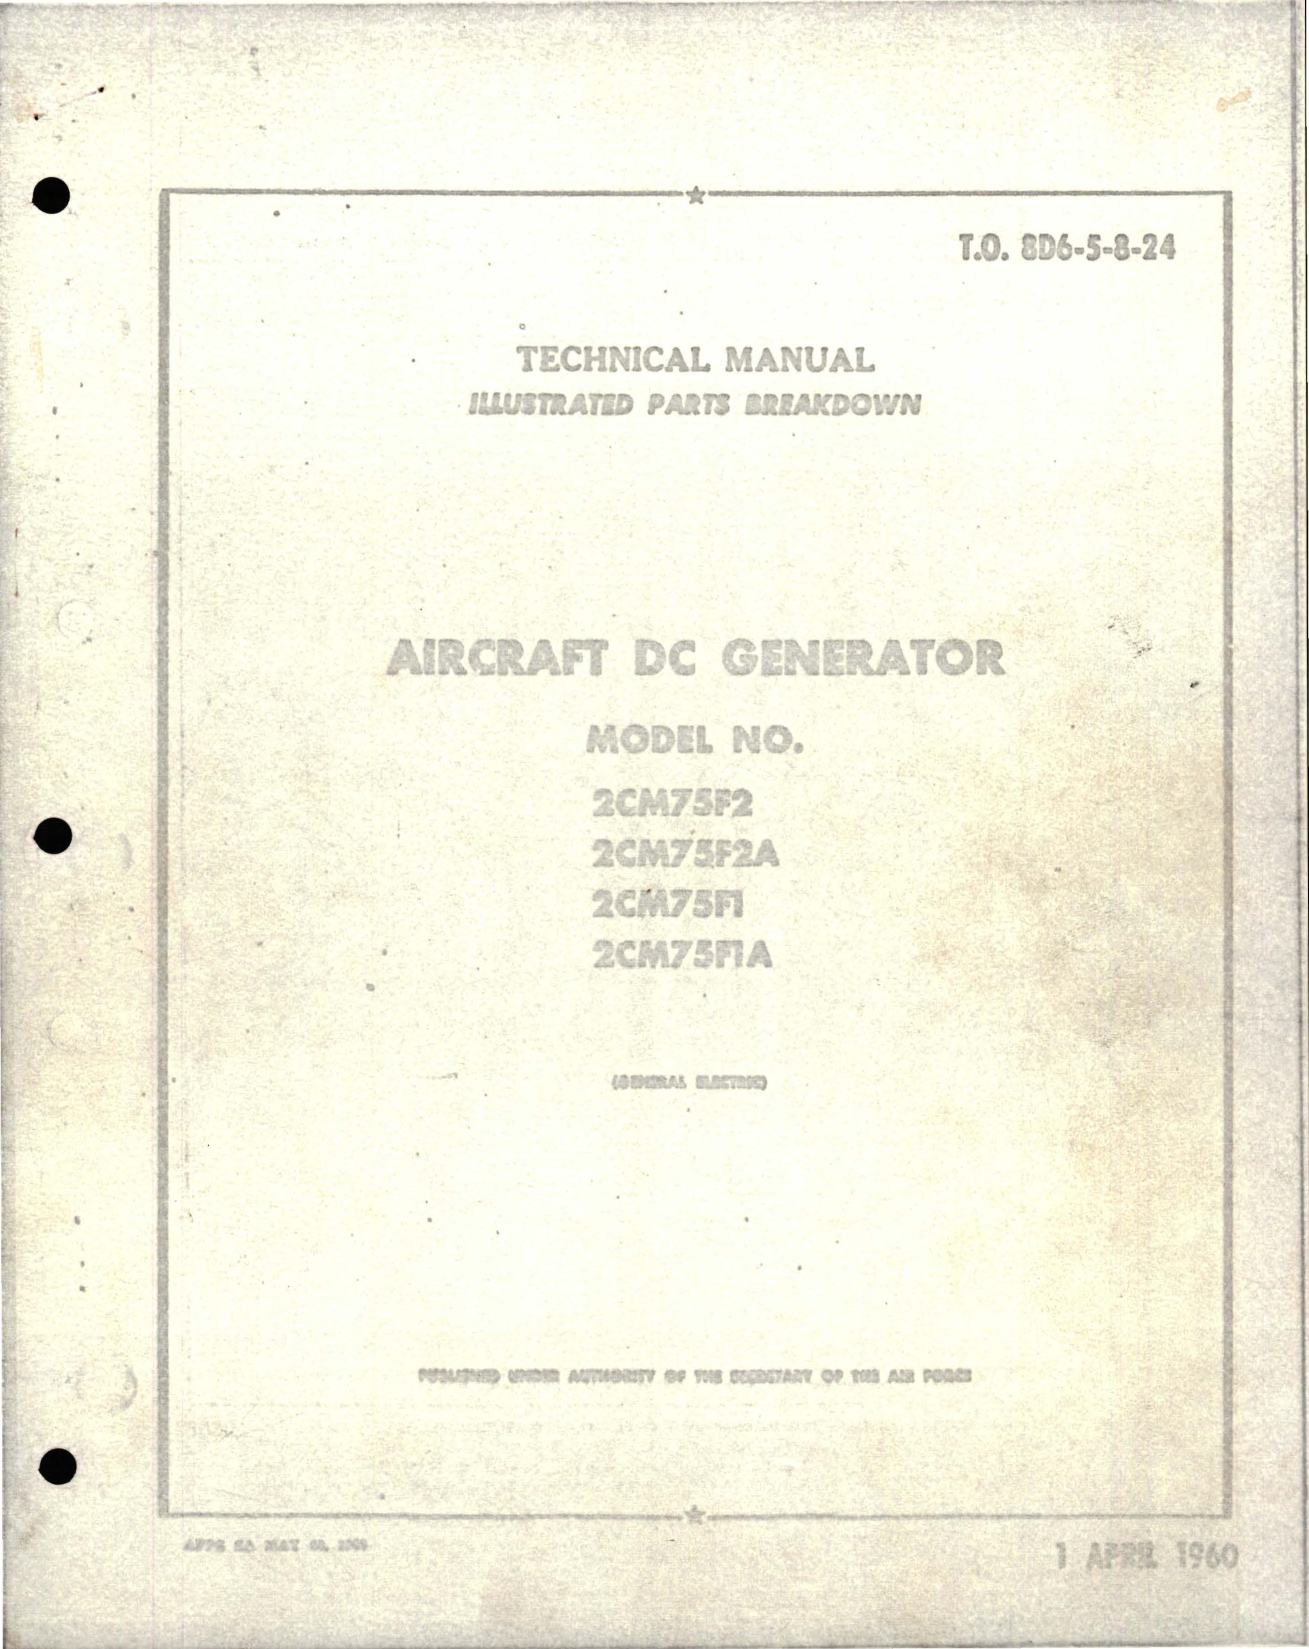 Sample page 1 from AirCorps Library document: Illustrated Parts Breakdown for DC Generator - Models 2CM75F2, 2CM75F2A, 2CM75F1, and 2CM75F1A 